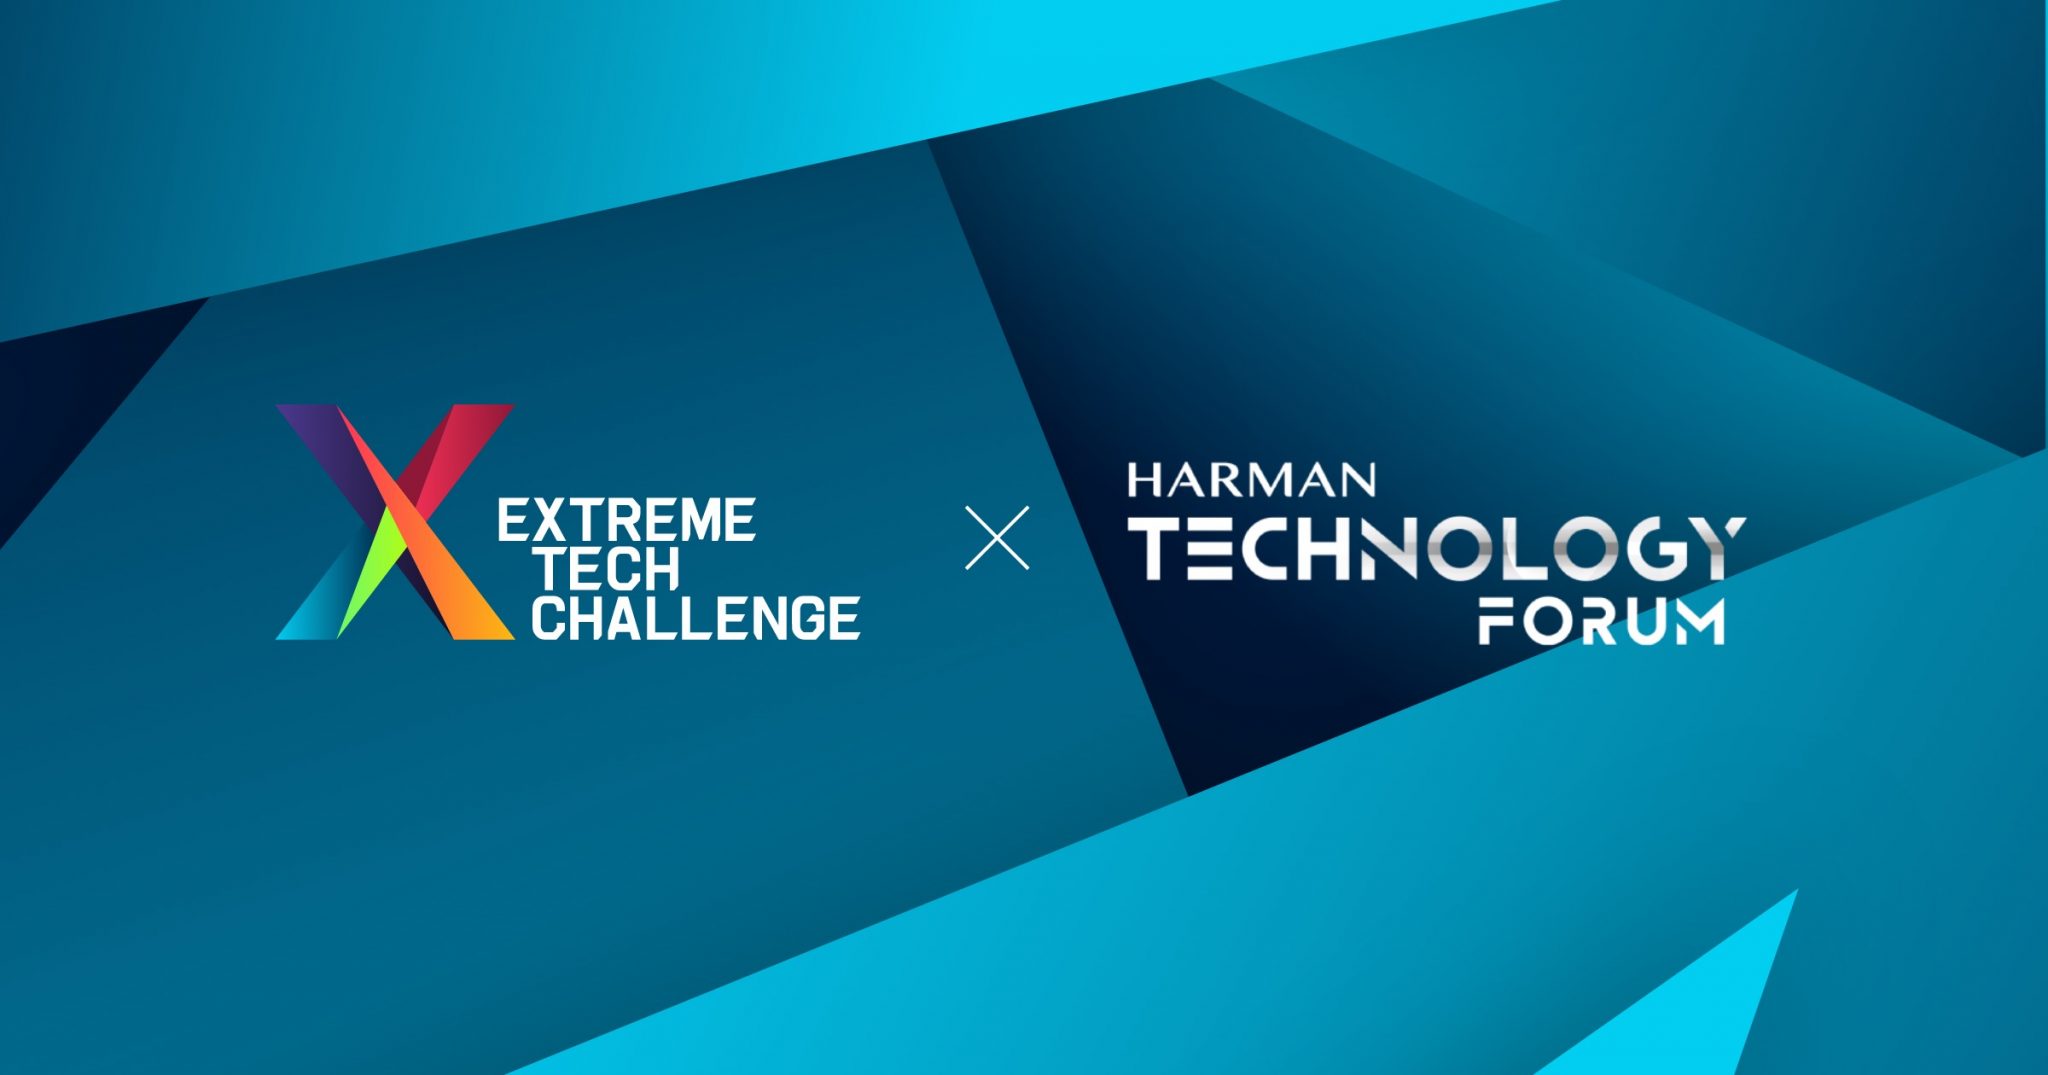 Harman Technology & Extreme Tech Challenge Announce Inaugural Startup